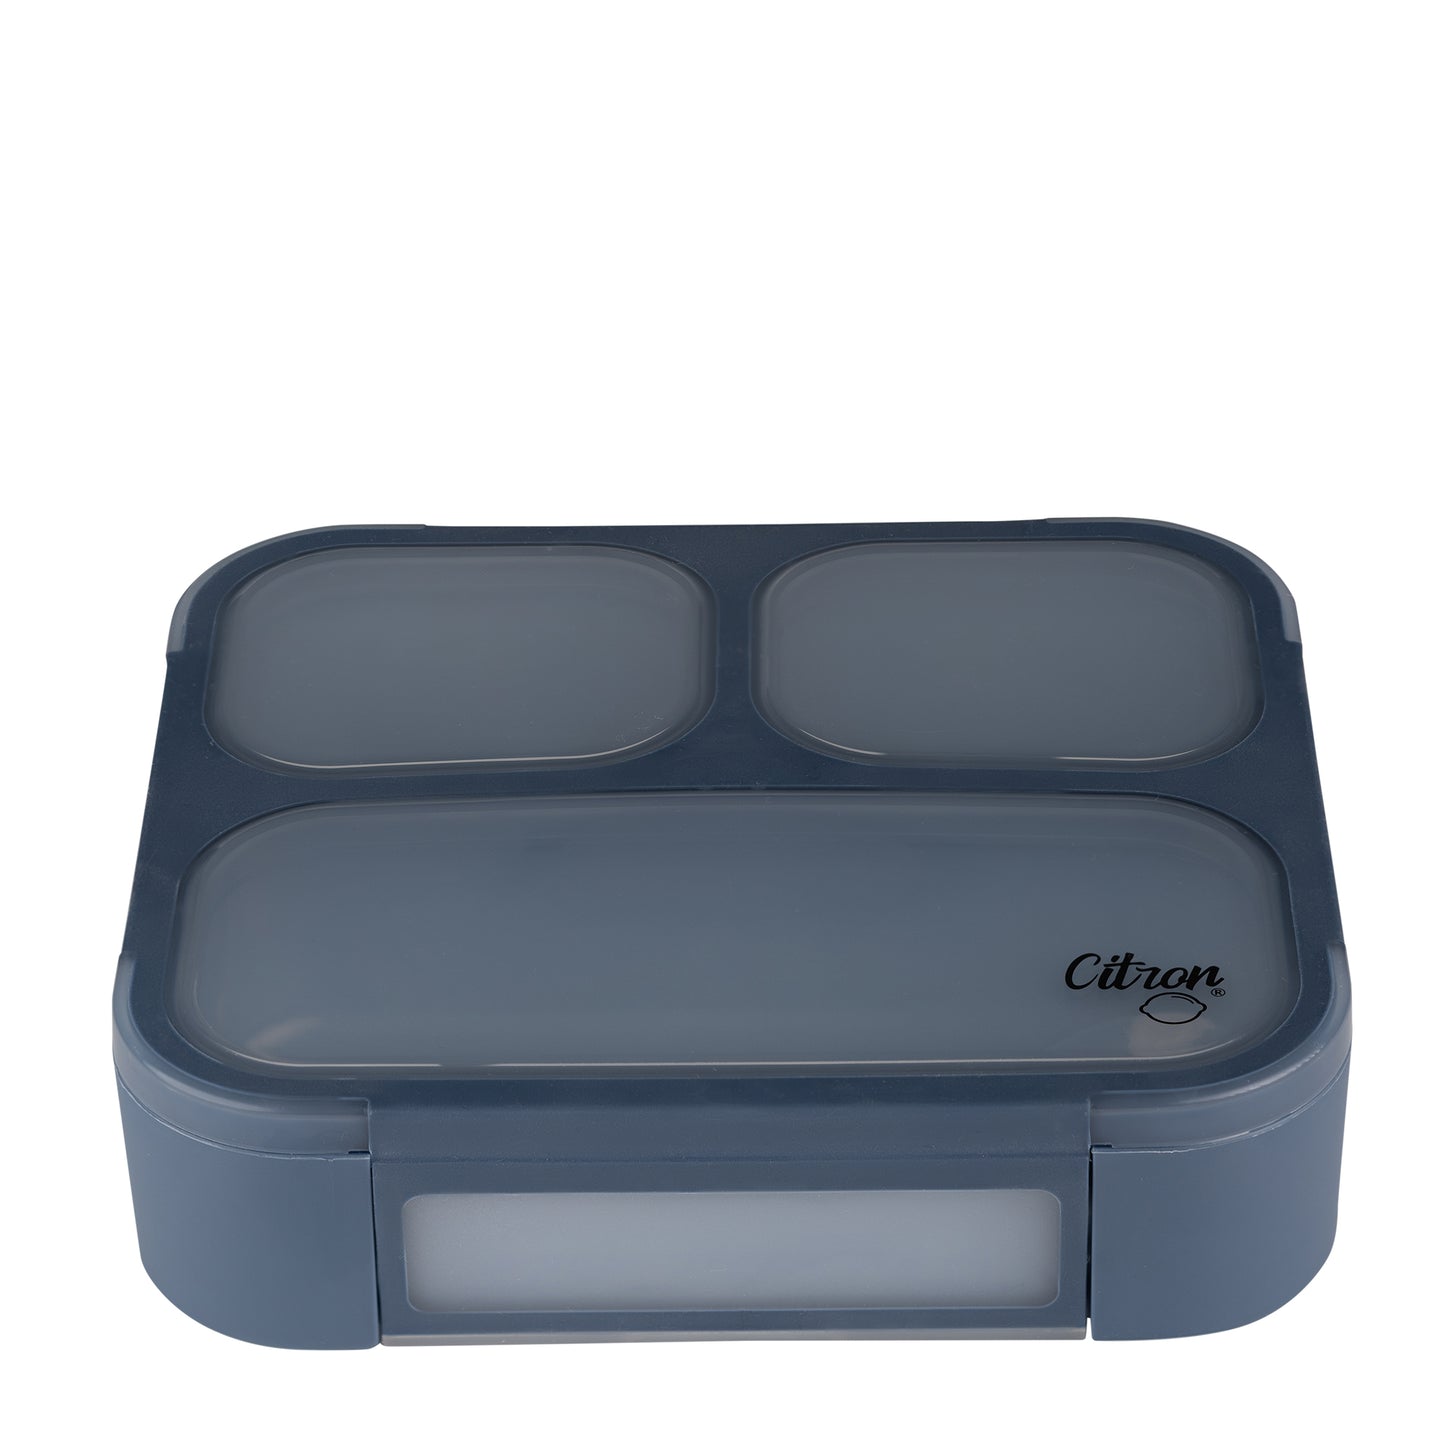 Lunchbox with Fork and Spoon - Dark Blue